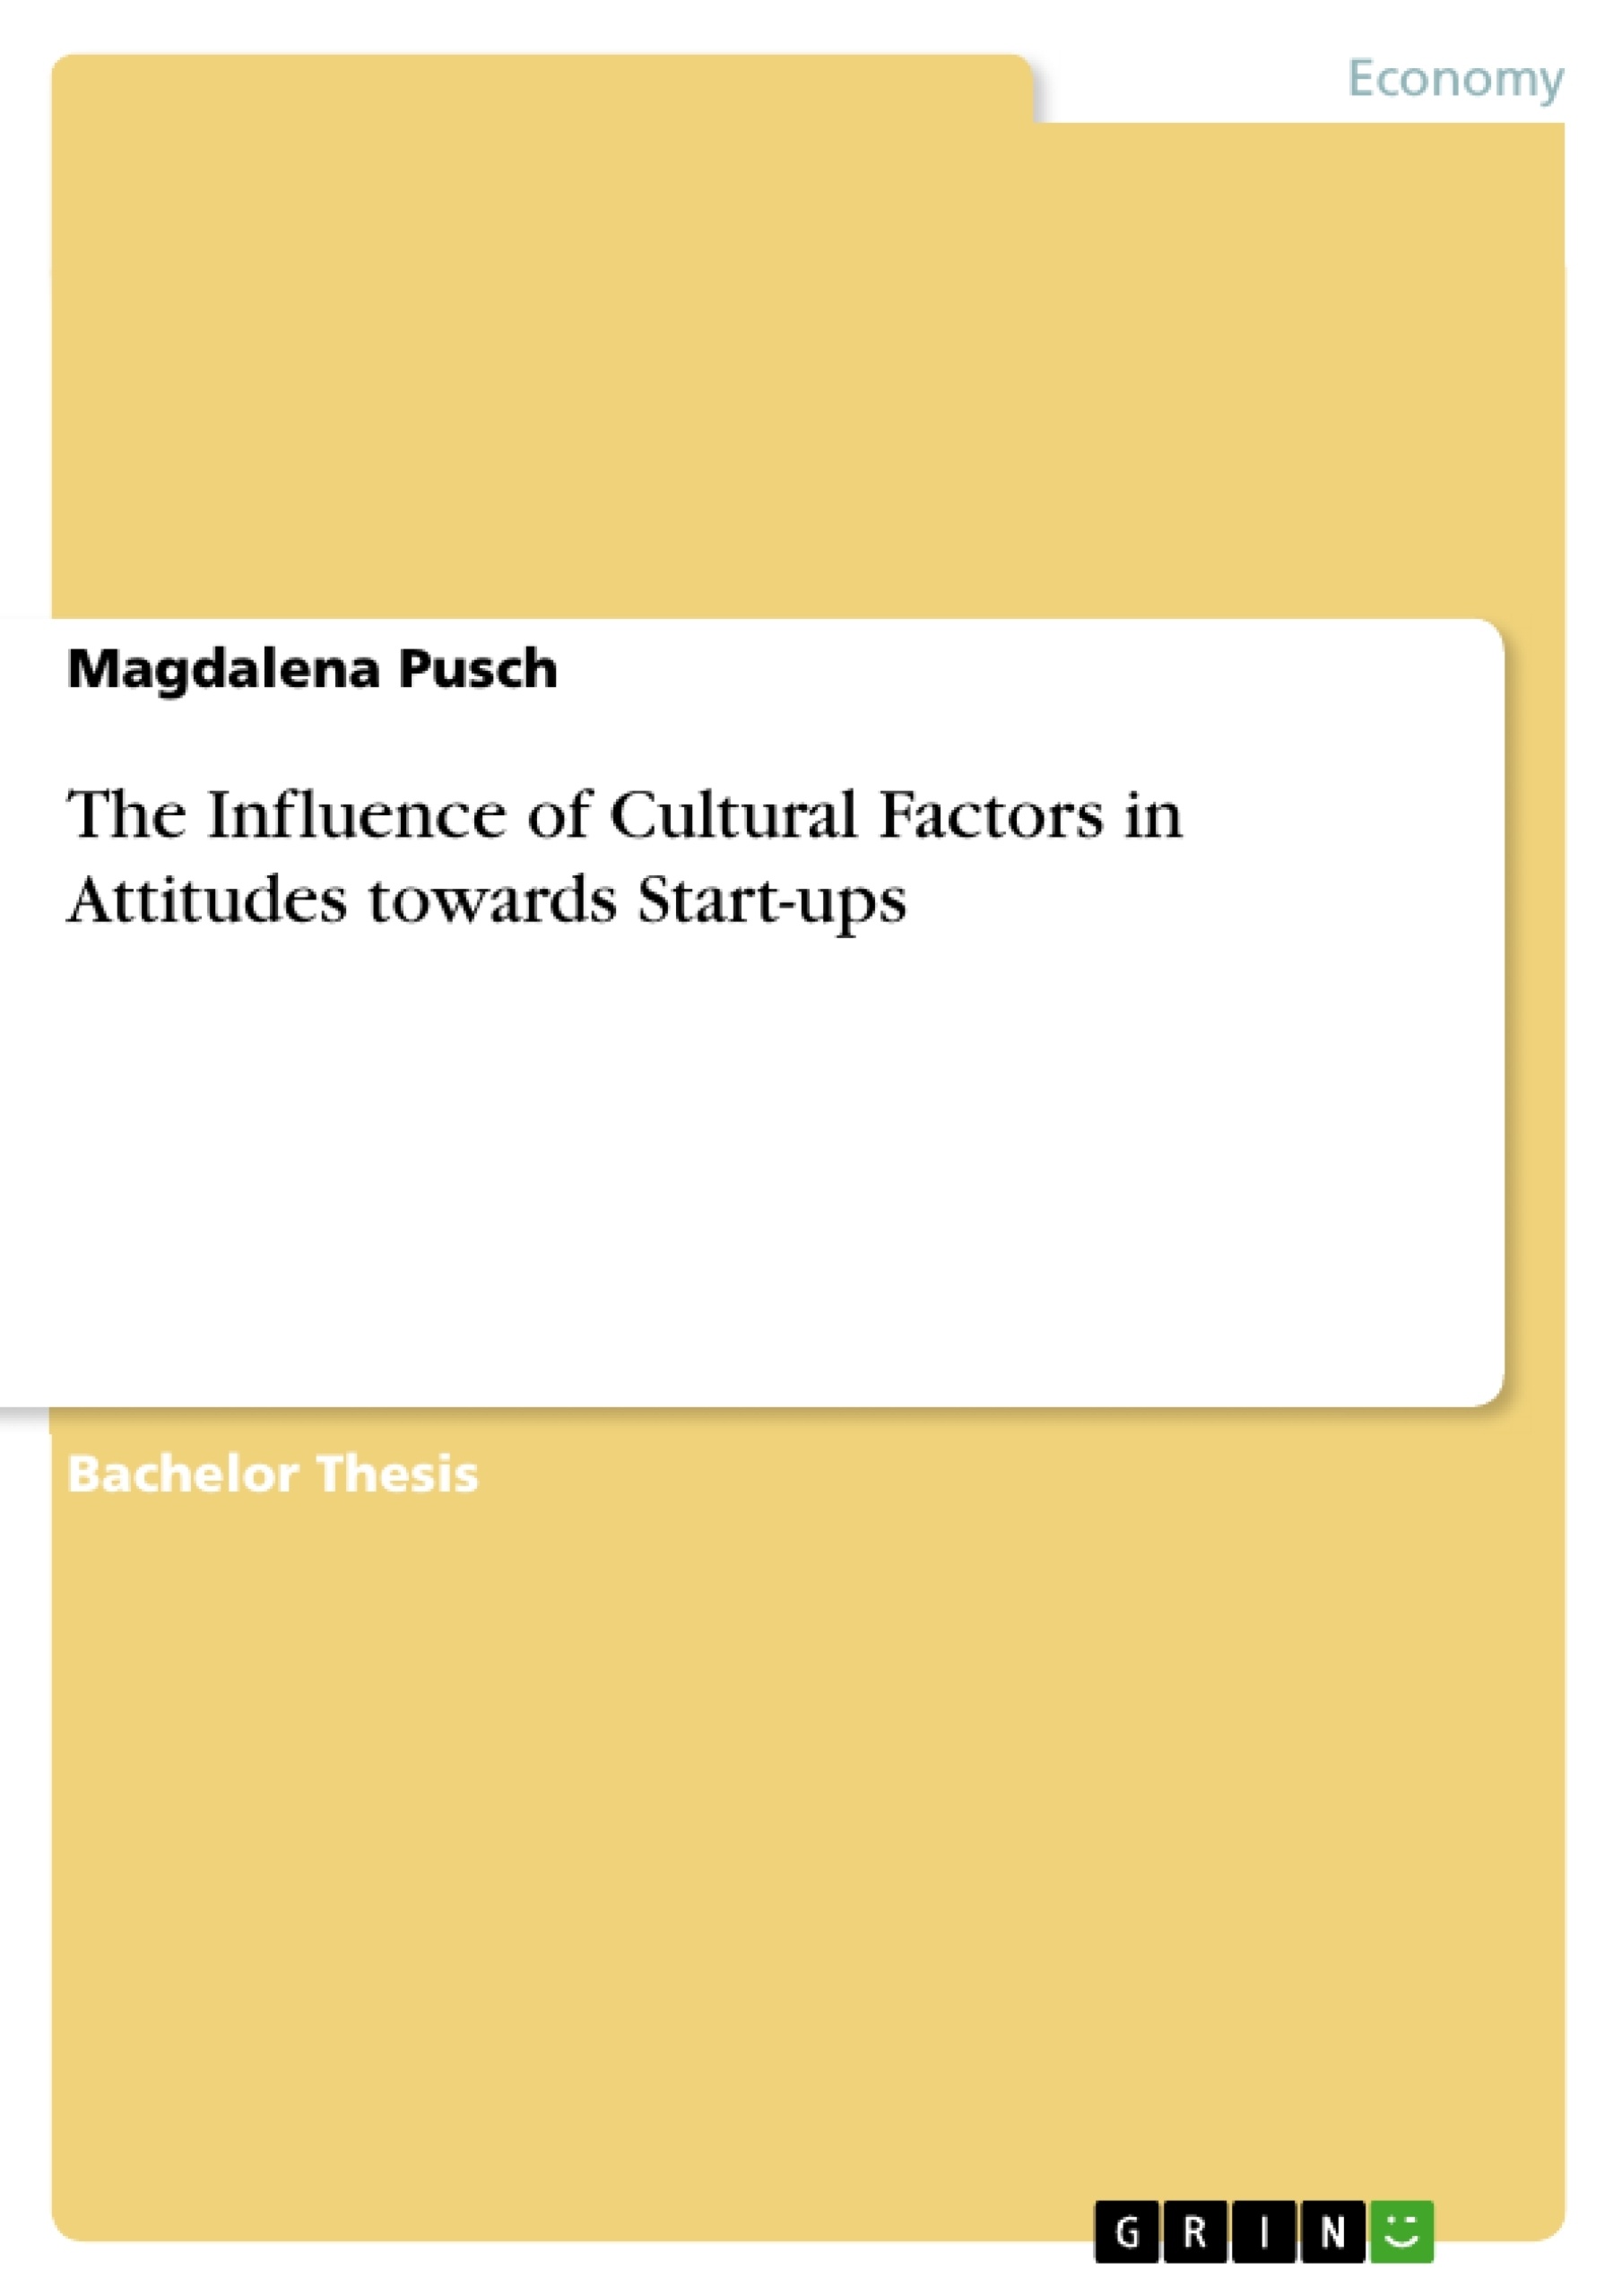 Title: The Influence of Cultural Factors in Attitudes towards Start-ups